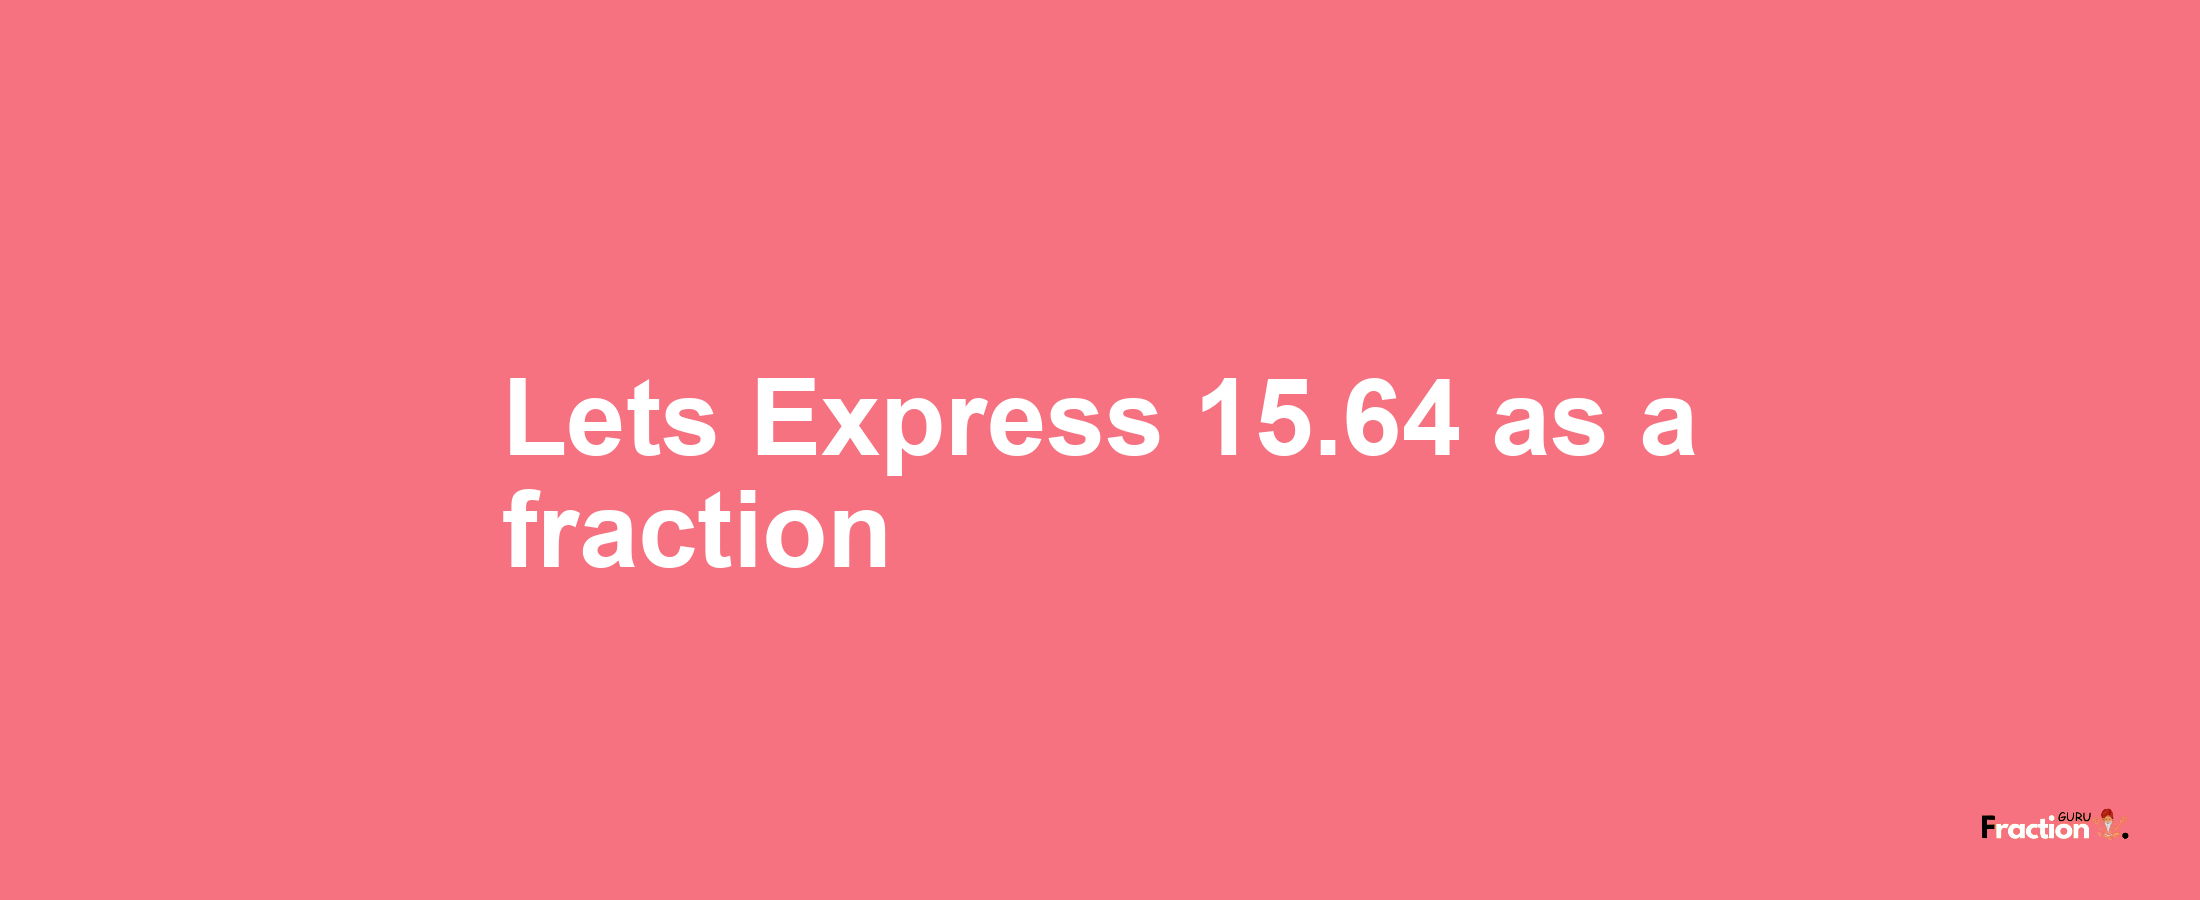 Lets Express 15.64 as afraction